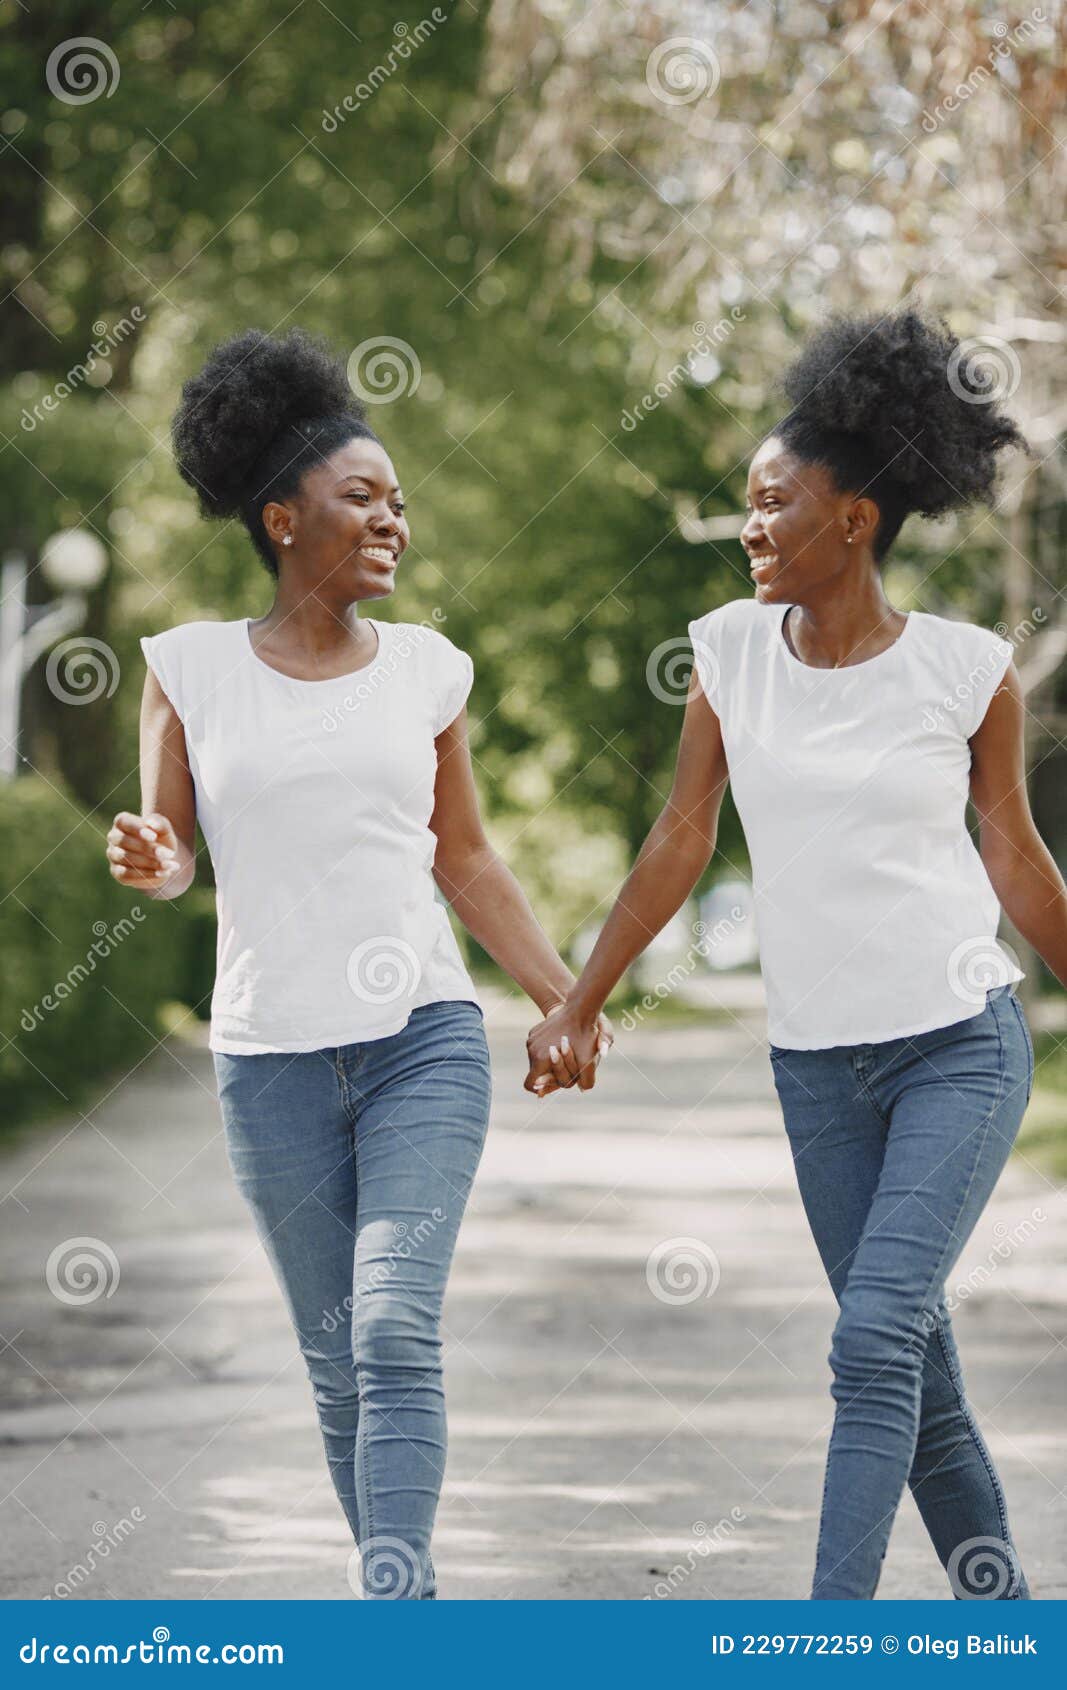 Close Up Portrait Of Two Teen Girls Holding Hands.African Teen Standing On  Beach With Caucasian Friend. Stock Photo, Picture and Royalty Free Image.  Image 61355887.